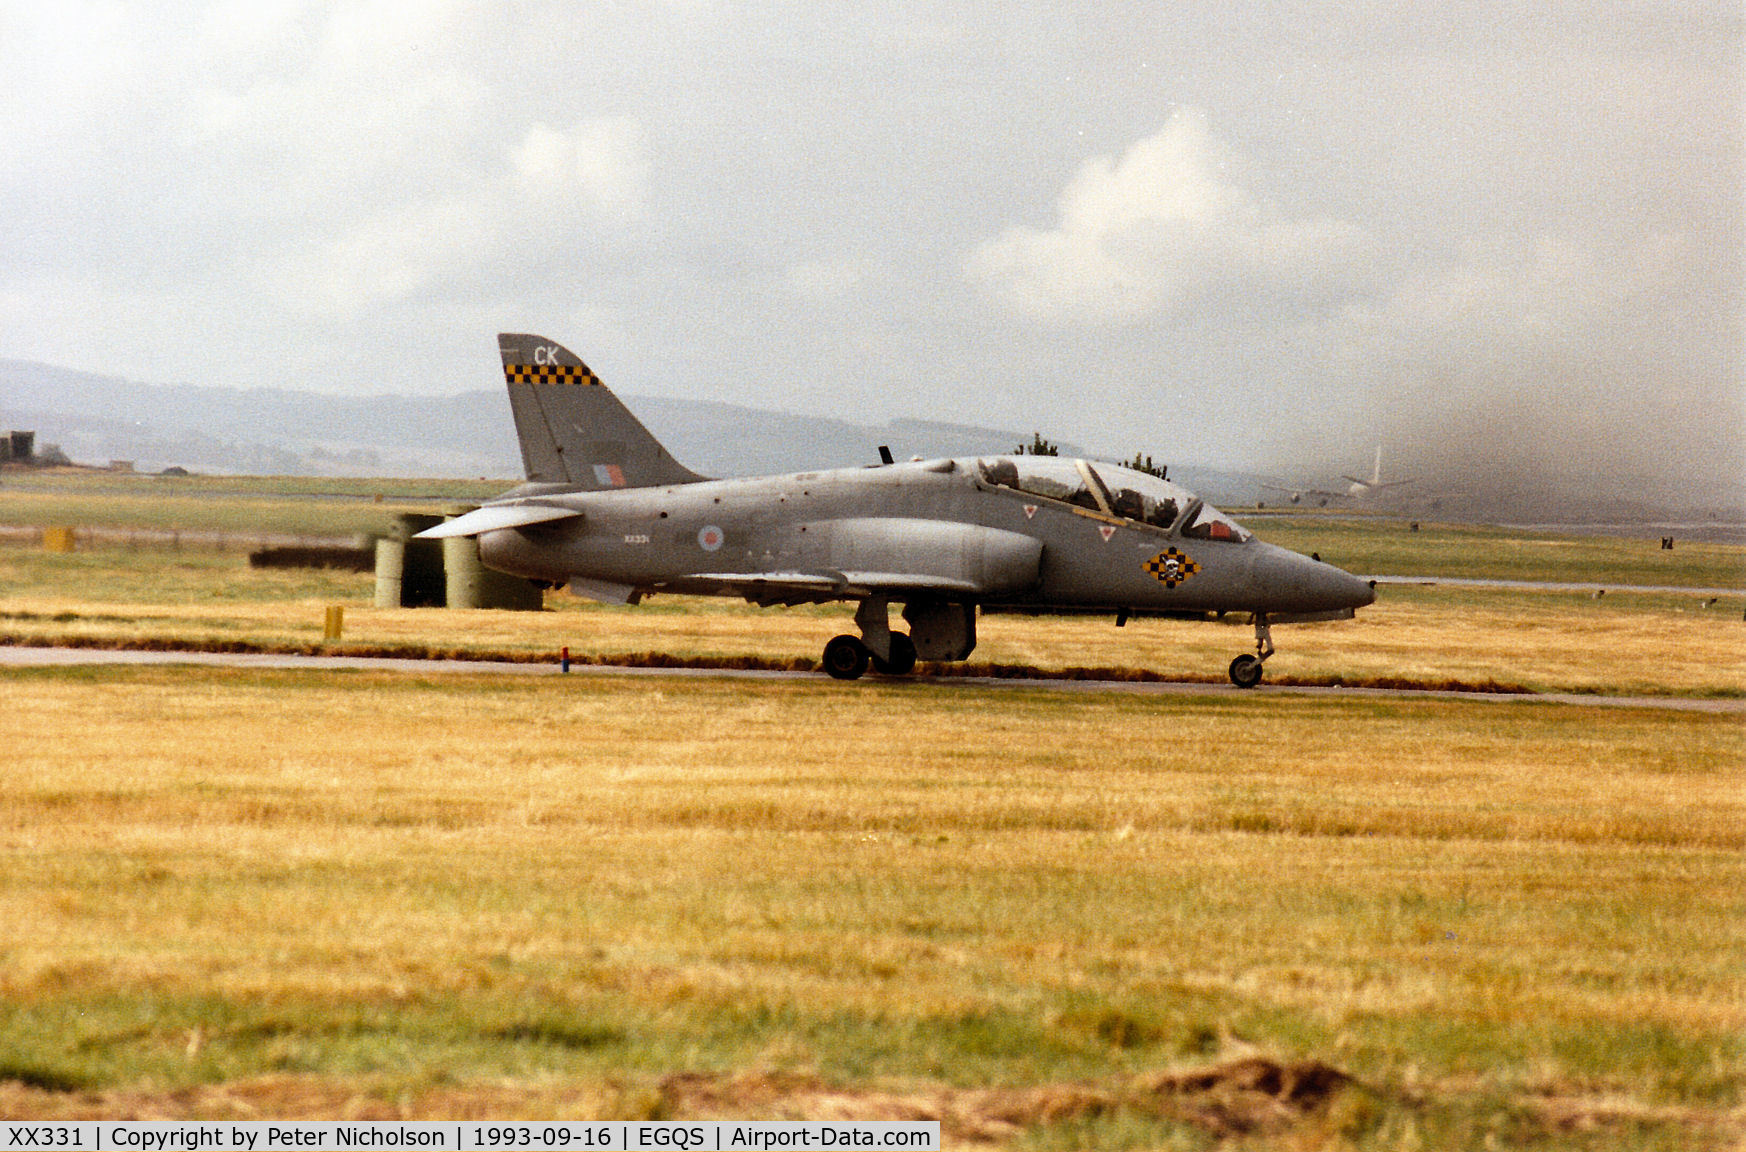 XX331, 1980 Hawker Siddeley Hawk T.1A C/N 177/312155, Hawk T.1A of 100 Squadron at RAF Leeming waiting for clearance to join Runway 23 at RAF Lossiemouth in September 1993 on an Exercise Solid Stance mission .